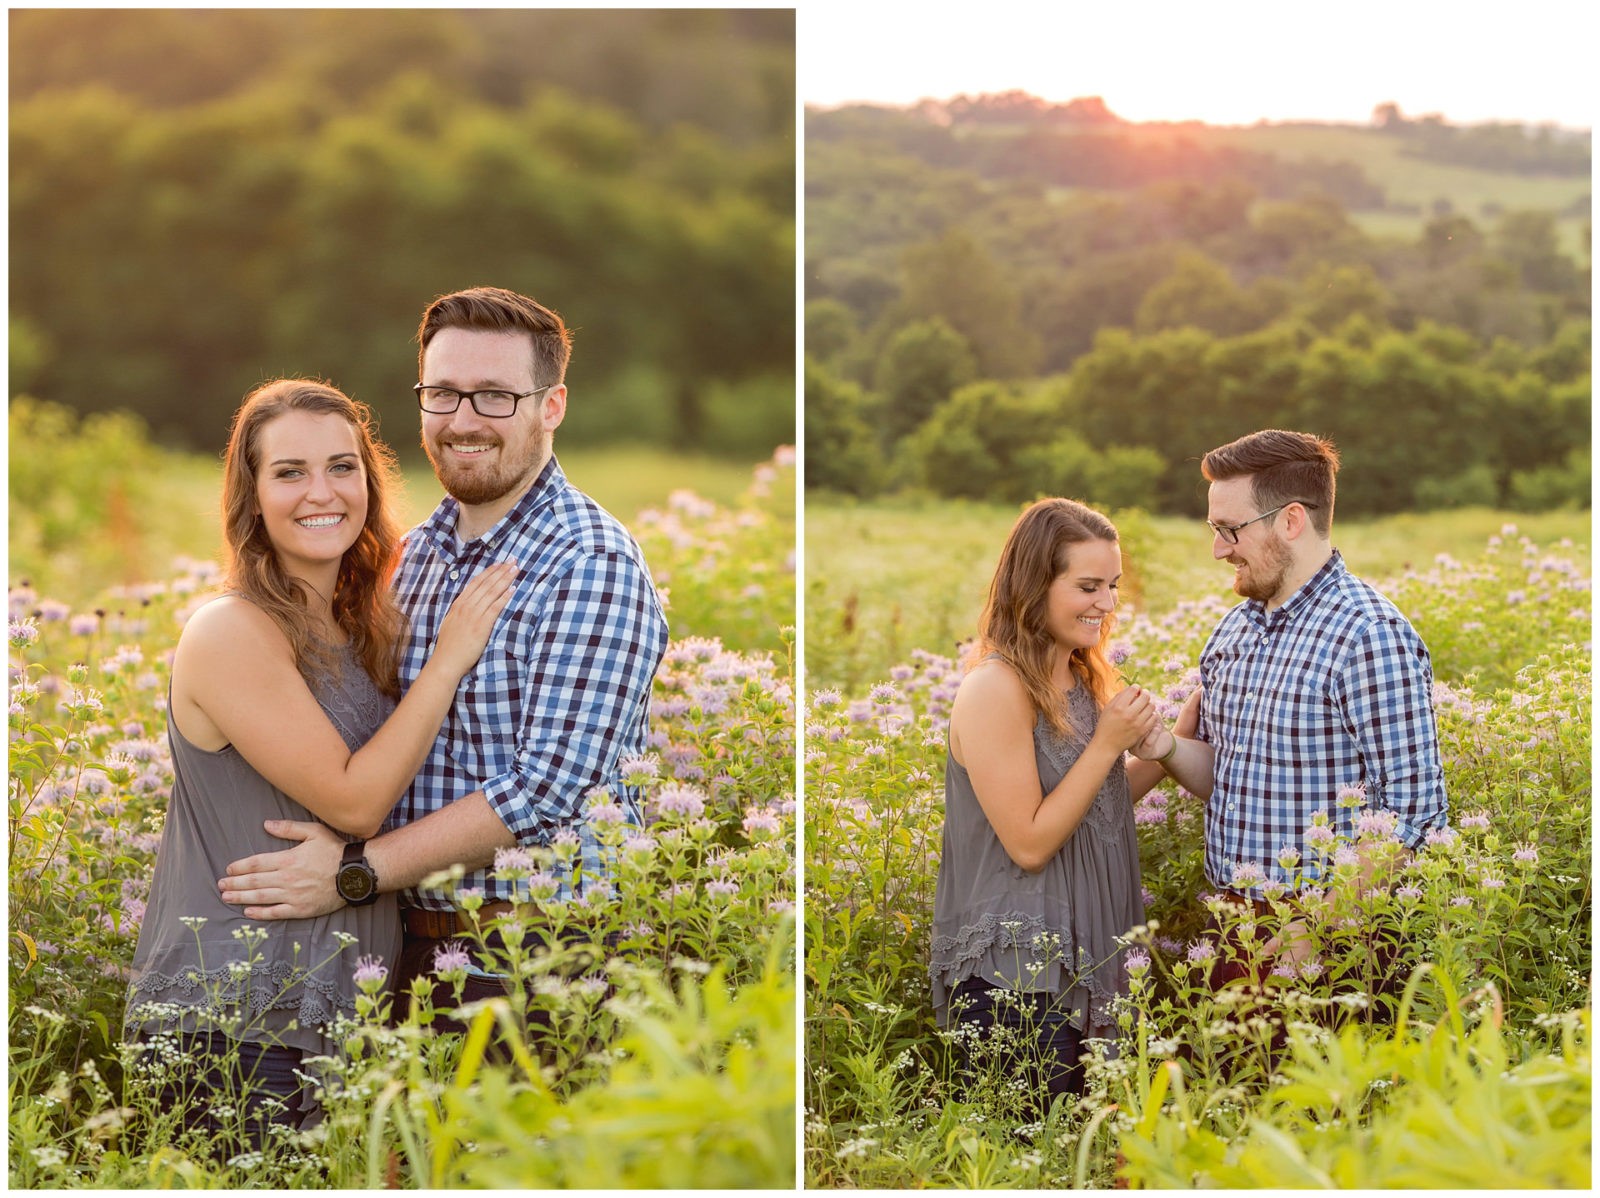 Summer engagement session in wildflowers at Shaker Village in Harrodsburg, Kentucky.